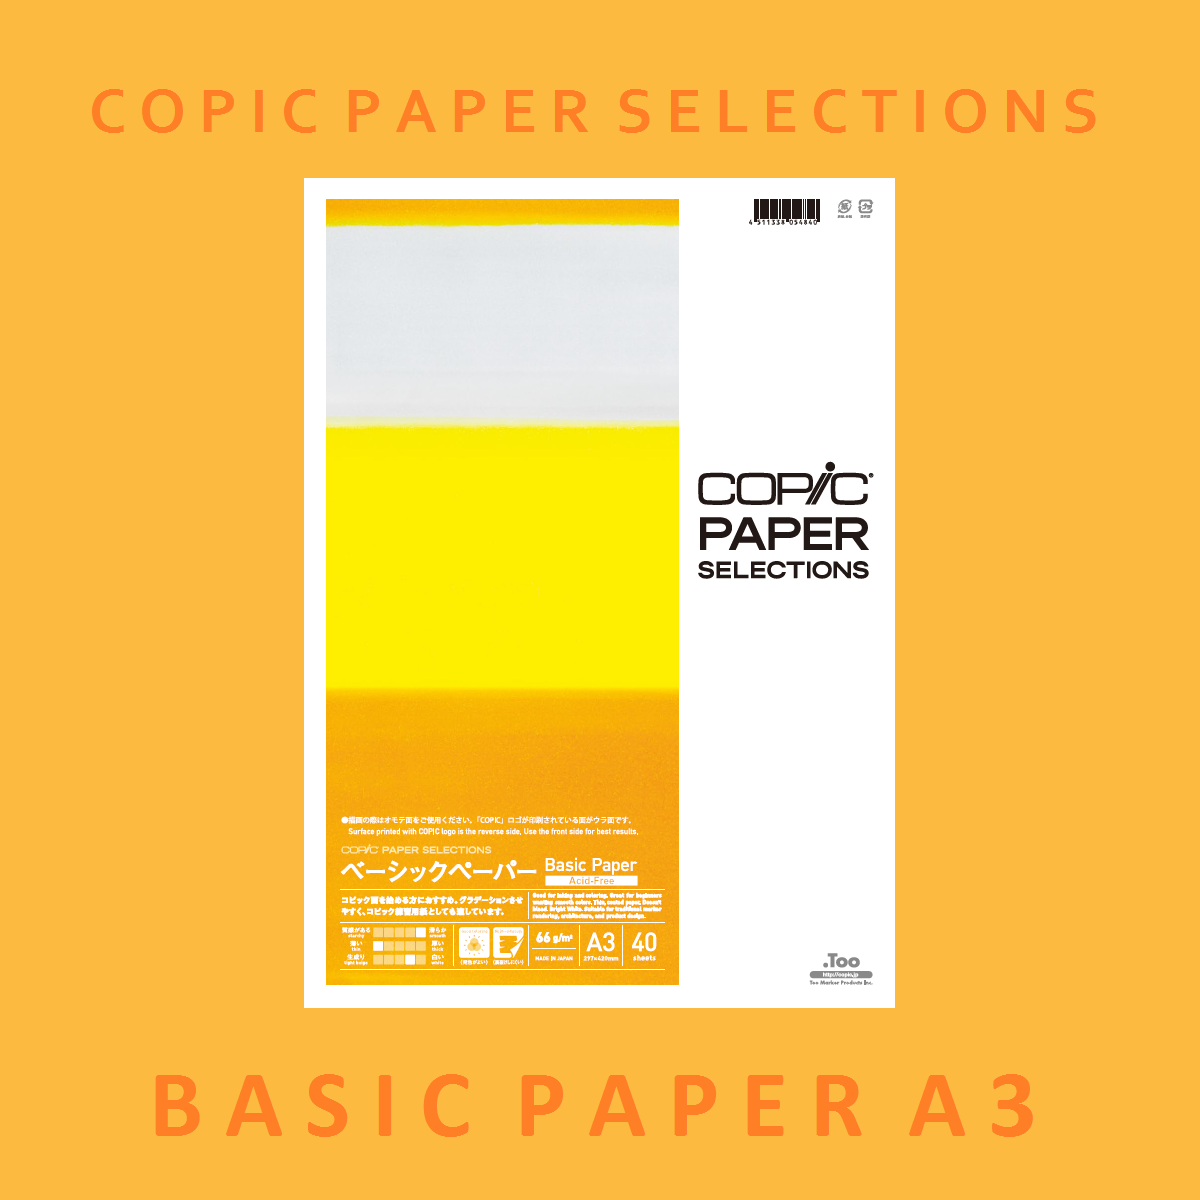 Paper for Copic markers, Copic Paper Selections - COPIC Official